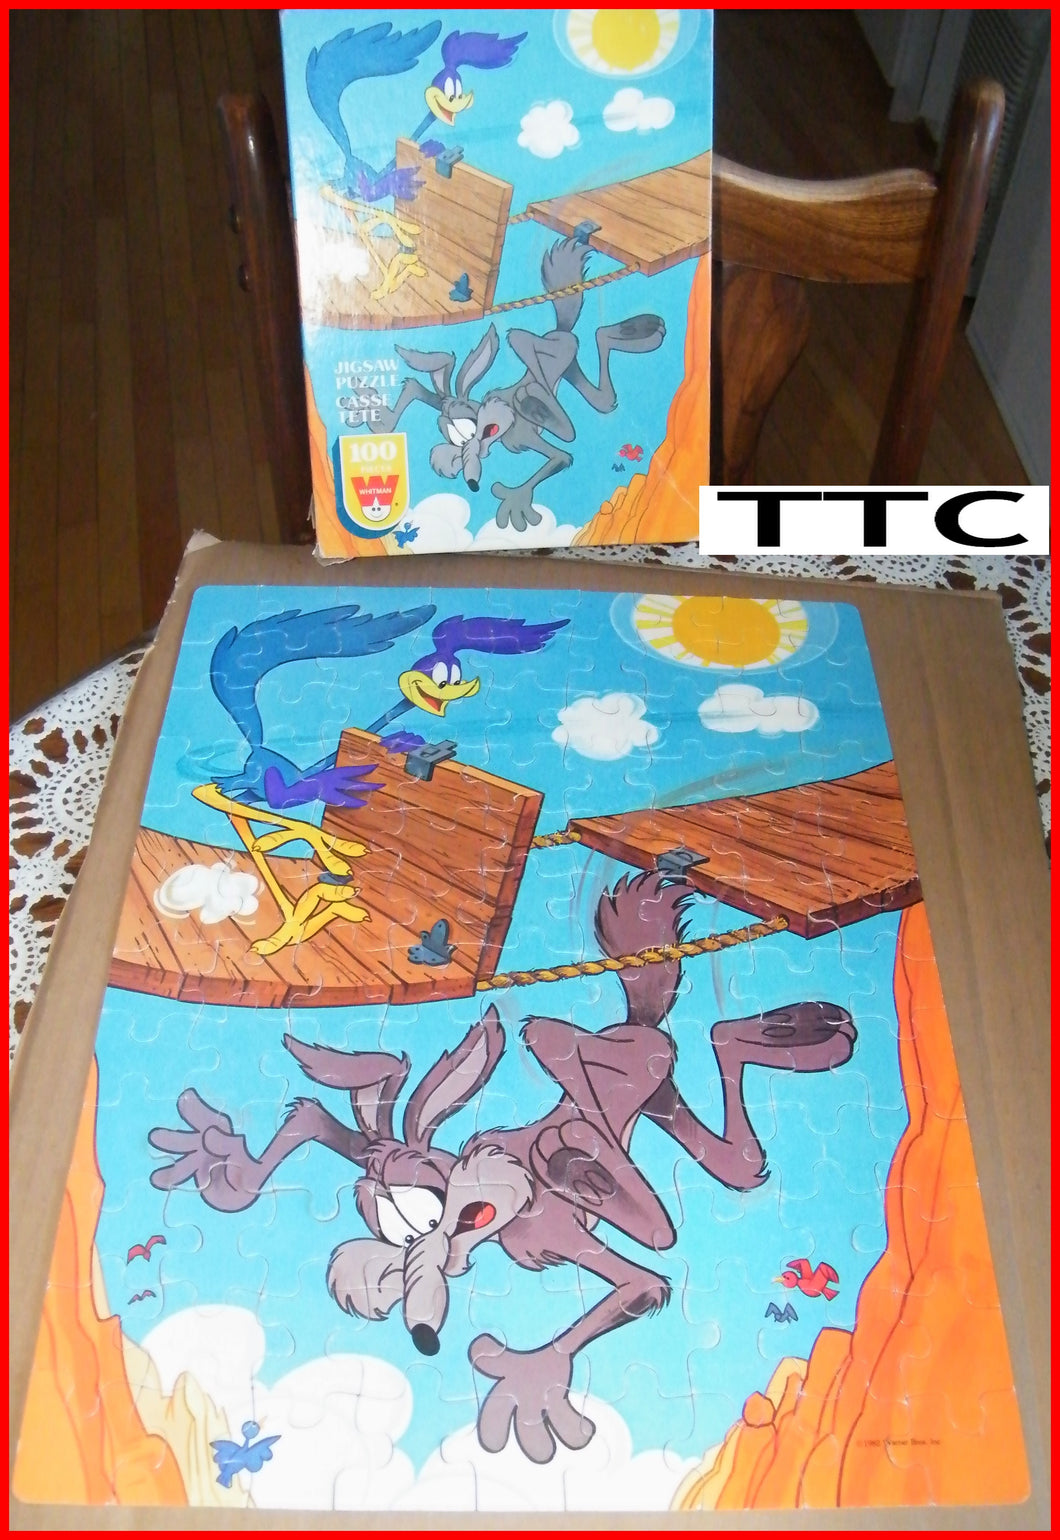 ROAD RUNNER AND COYOTE - 100 mcx puzzle complete